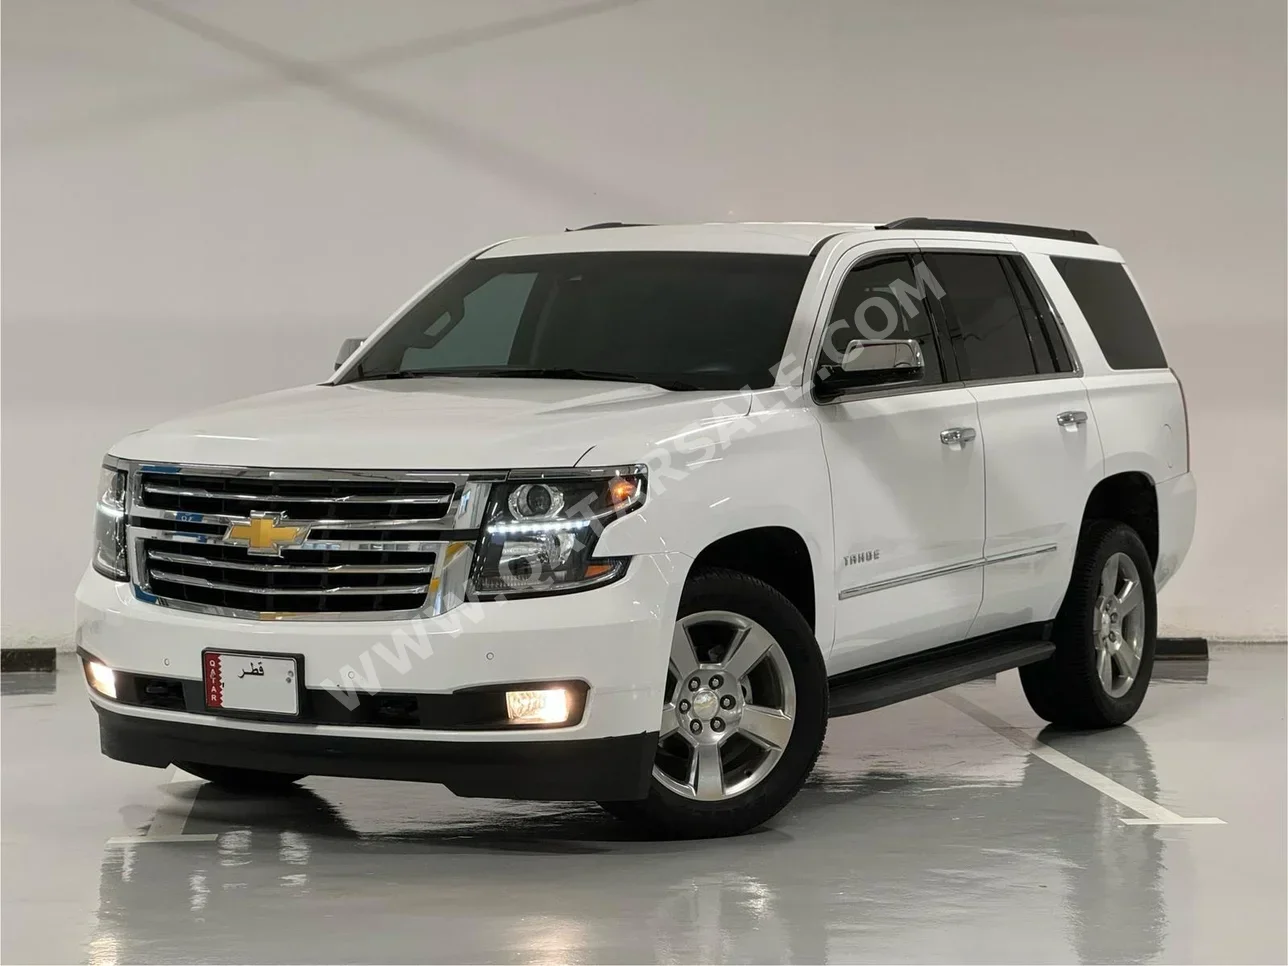 Chevrolet  Tahoe  2019  Automatic  58,000 Km  8 Cylinder  Four Wheel Drive (4WD)  SUV  White